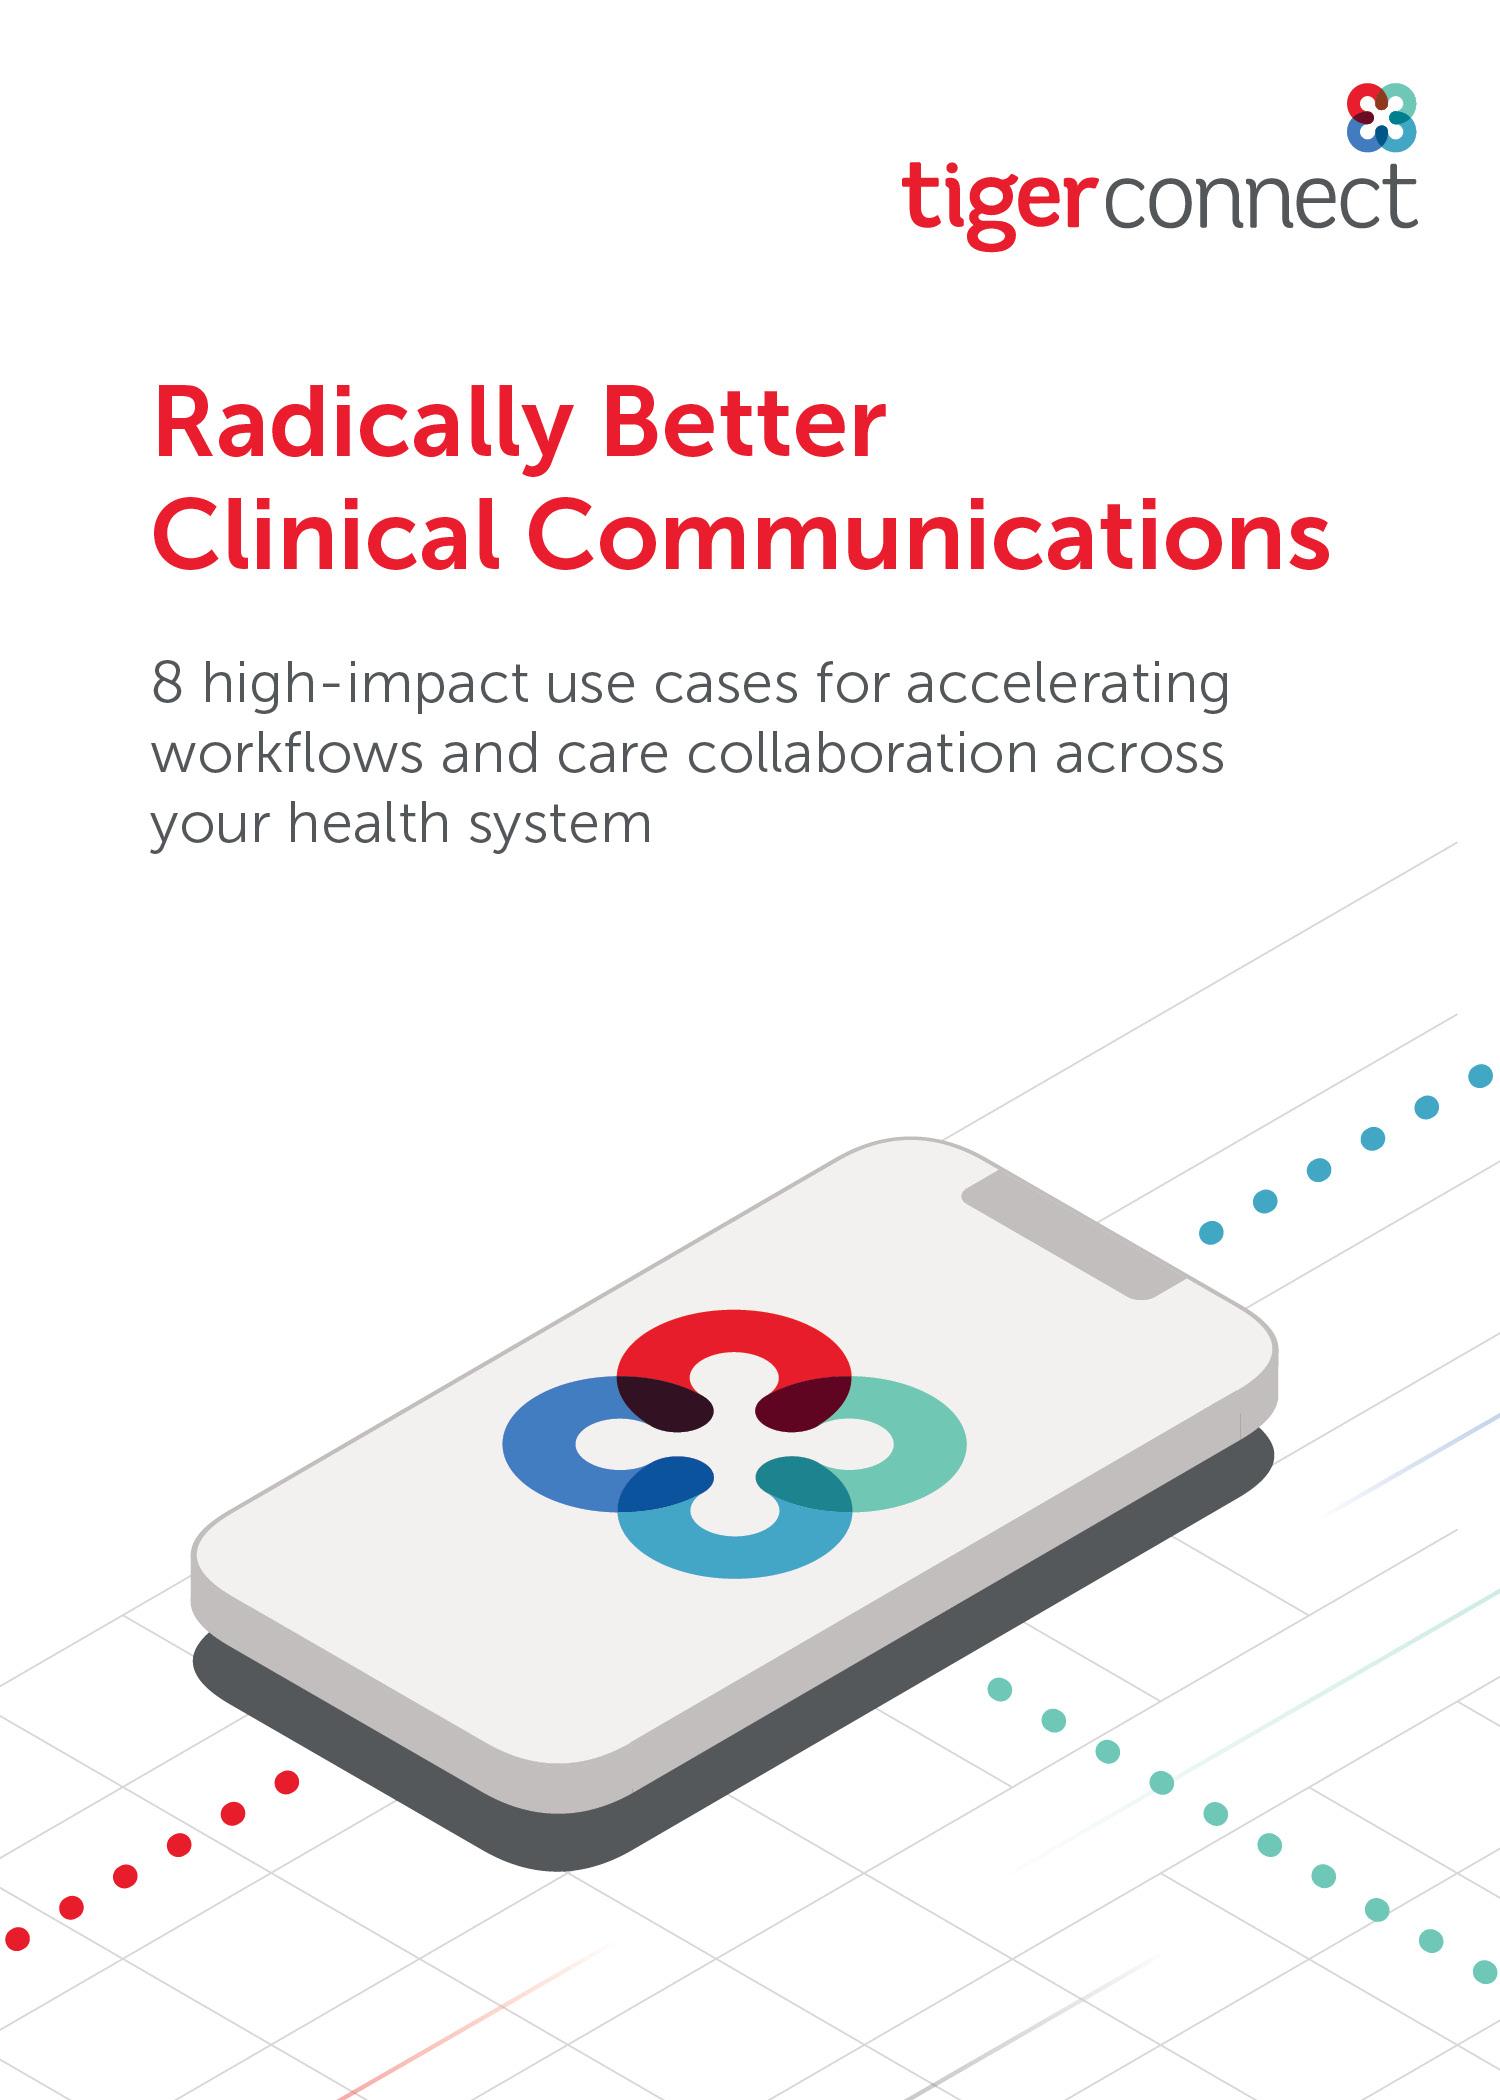 Tigerconnect Logo - Radically Better Clinical Communications Use Cases Brochure ...